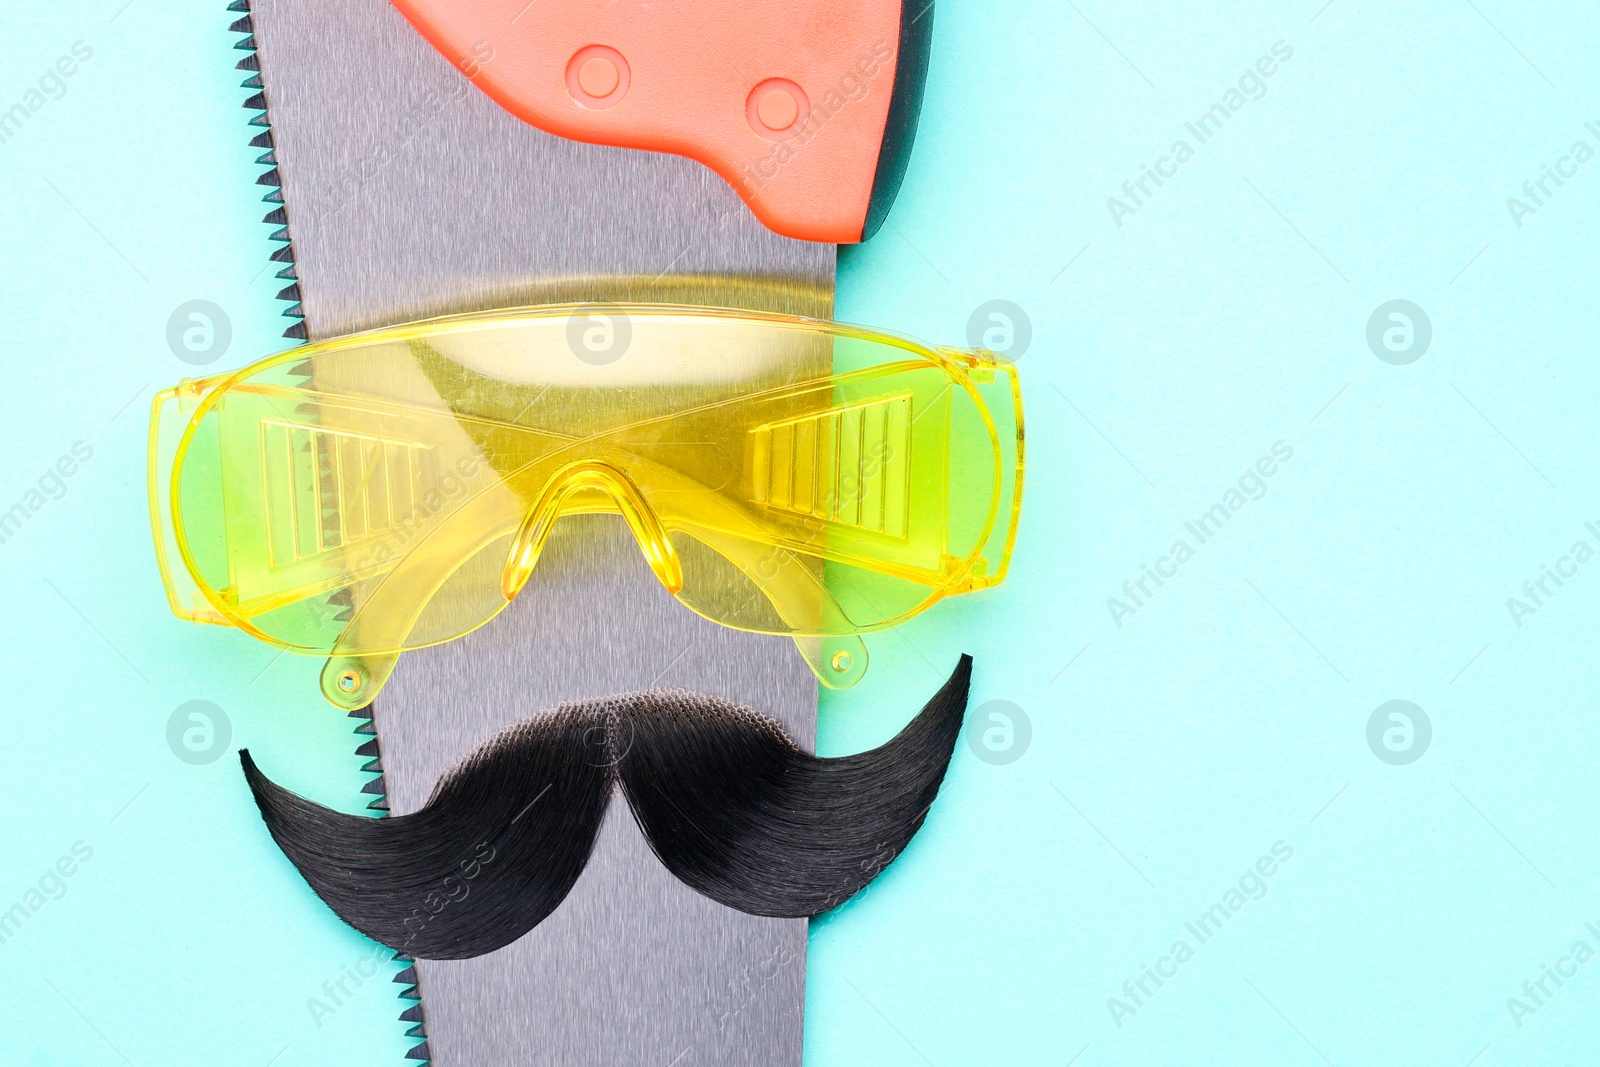 Photo of Man's face made of artificial mustache, safety glasses and hand saw on light blue background, top view. Space for text